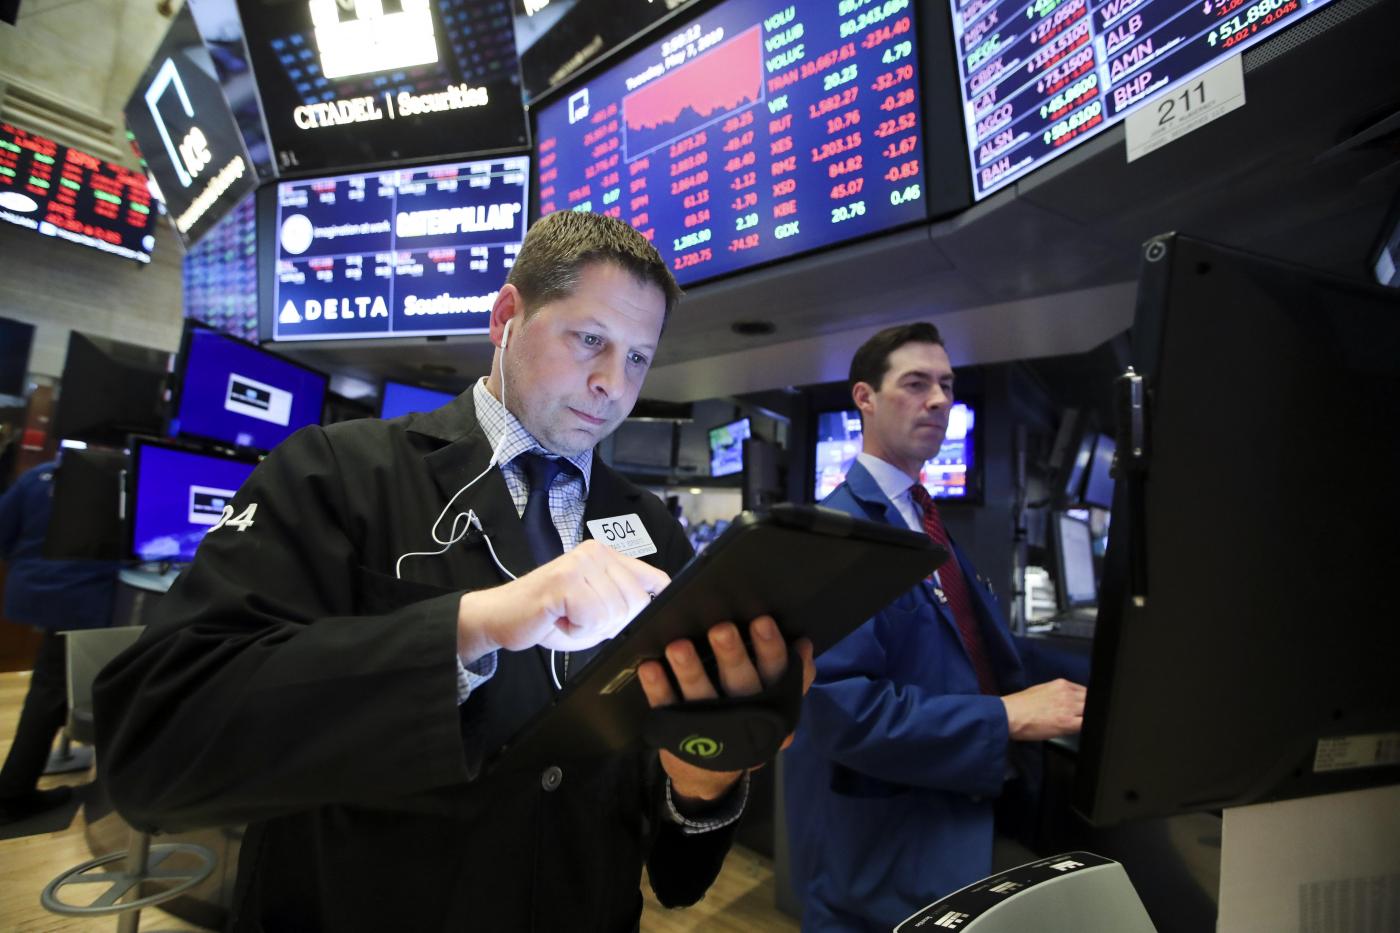 NEW YORK, May 7, 2019 (Xinhua) -- Traders work at the New York Stock Exchange in New York, the United States, on May 7, 2019. U.S. stocks ended sharply lower on Tuesday. The Dow Jones Industrial Average fell 473.39 points, or 1.79 percent, to 25,965.09. The S&P 500 decreased 48.42 points, or 1.65 percent, to 2,884.05. The Nasdaq Composite Index was down 159.53 points, or 1.96 percent, to 7,963.76. (Xinhua/Wang Ying/IANS) by .